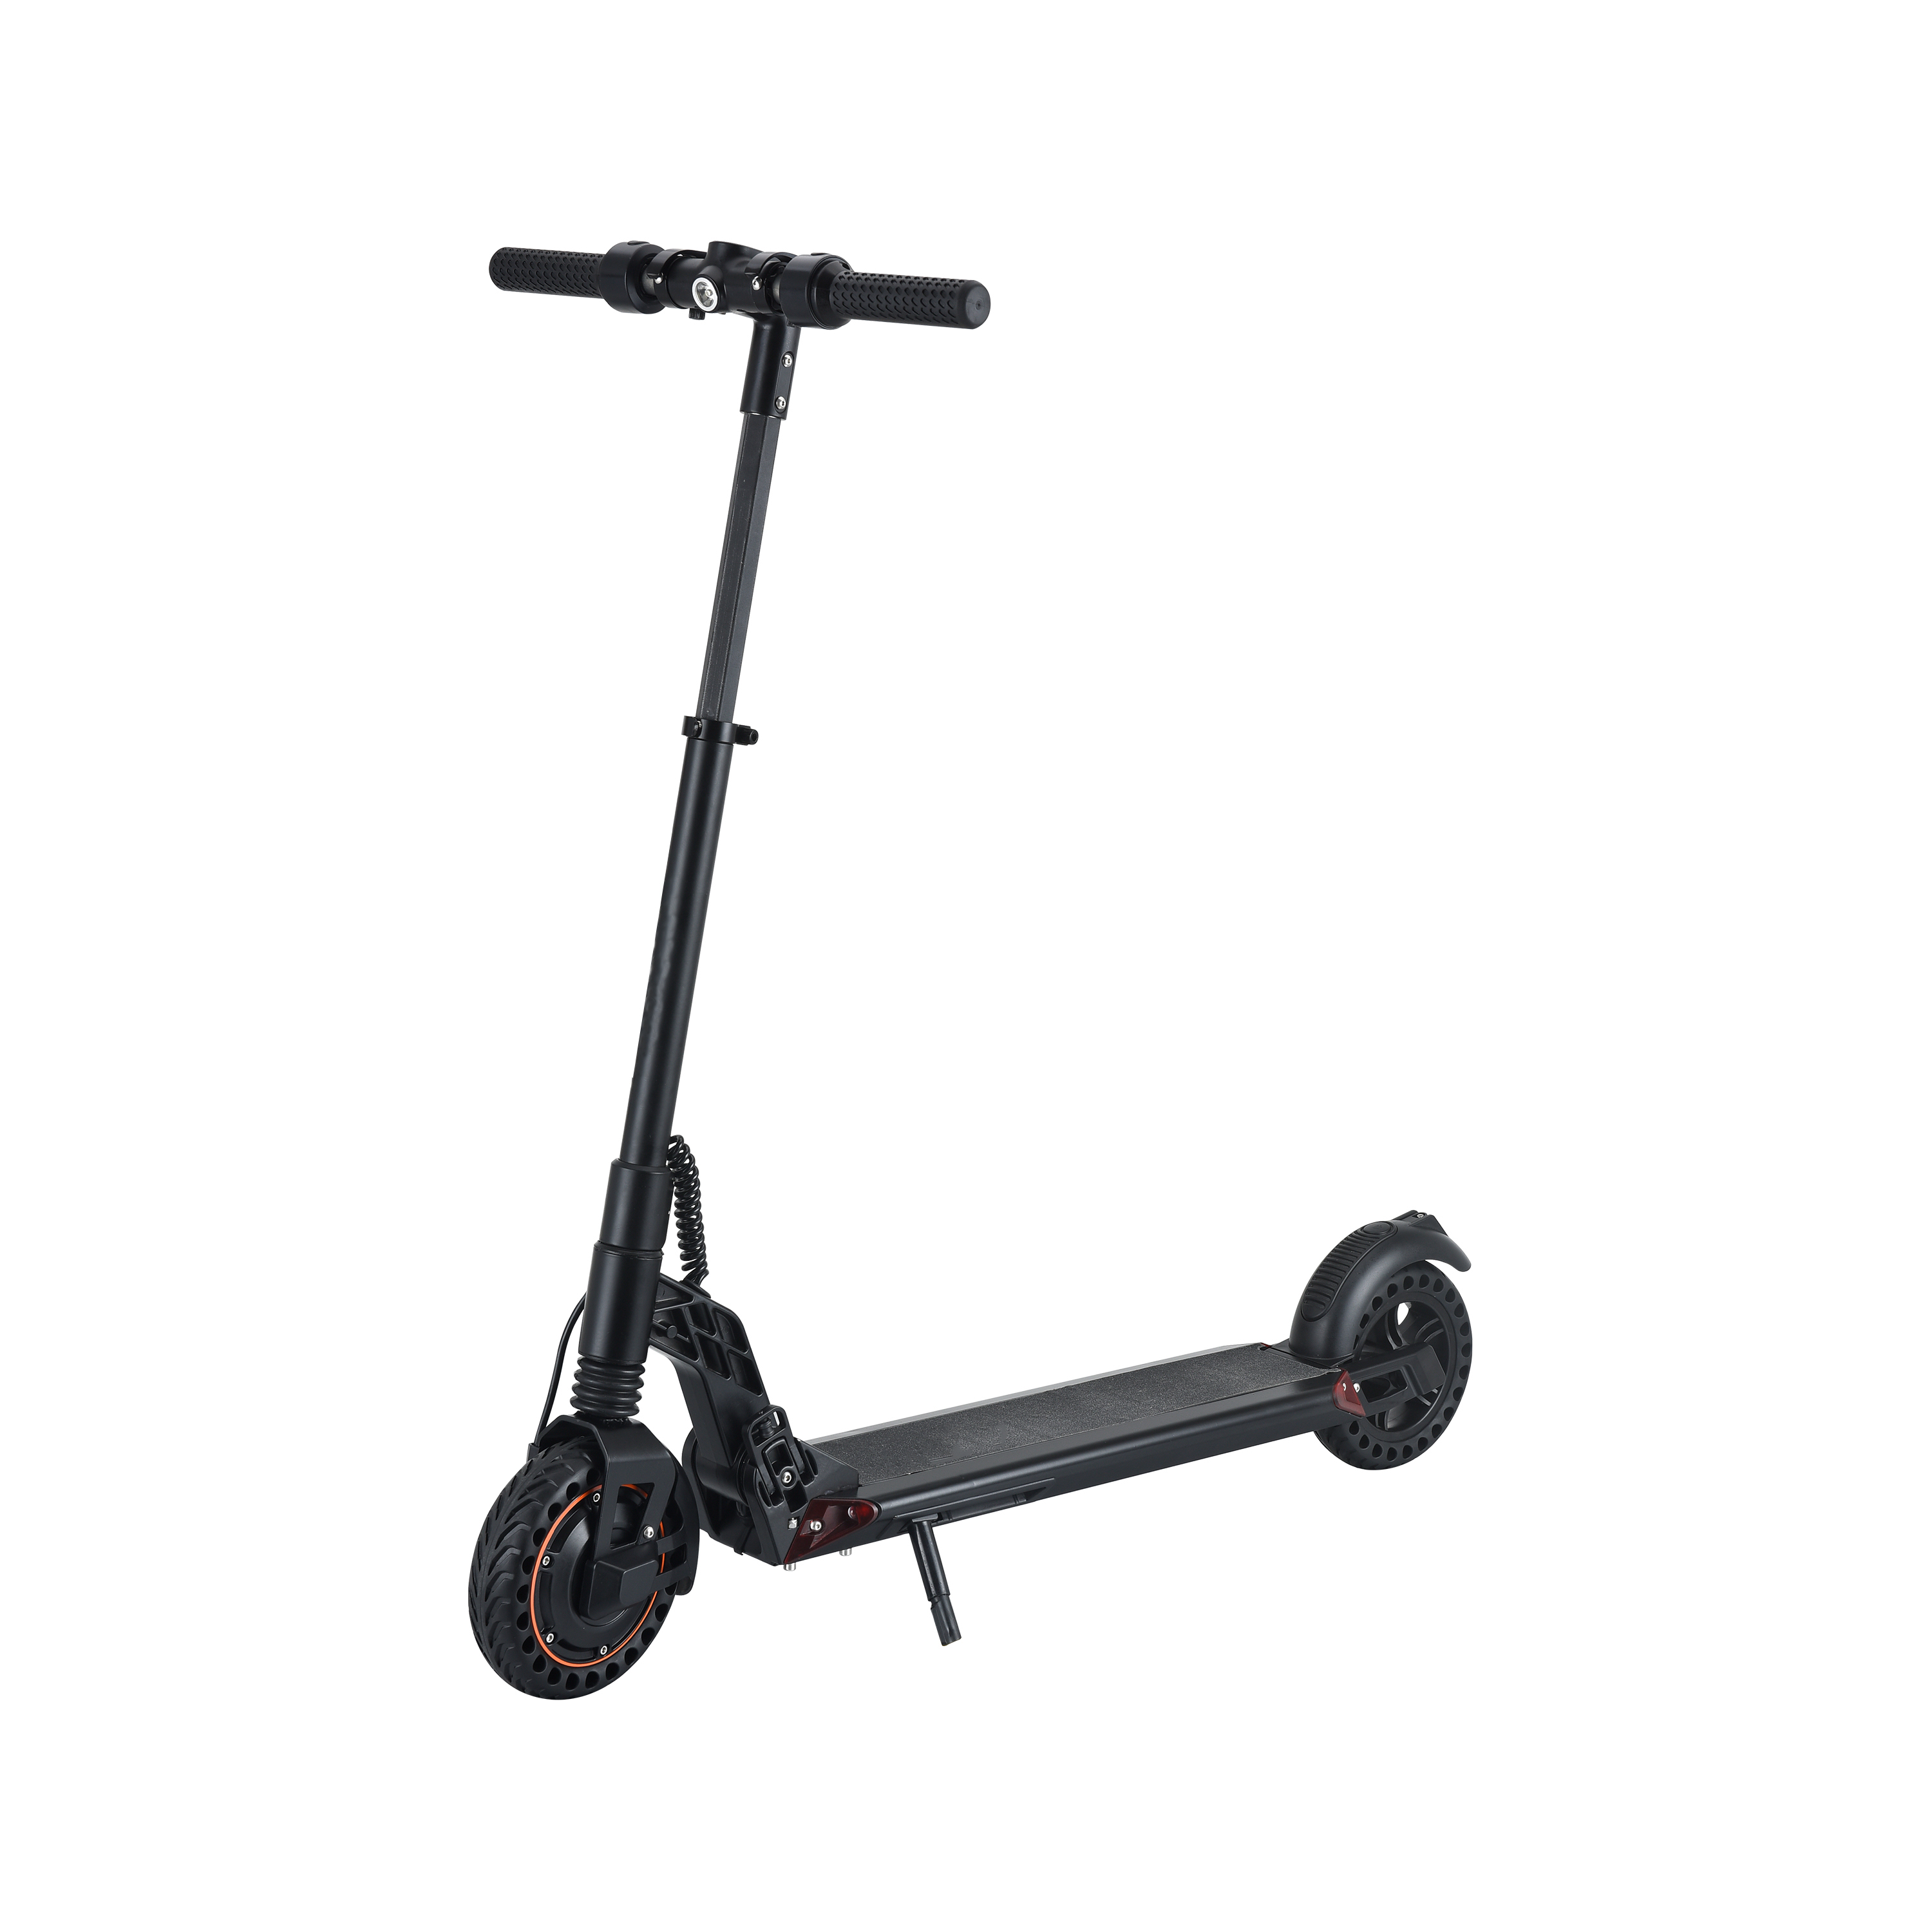 KUGOO S1 electric scooter Featured Image